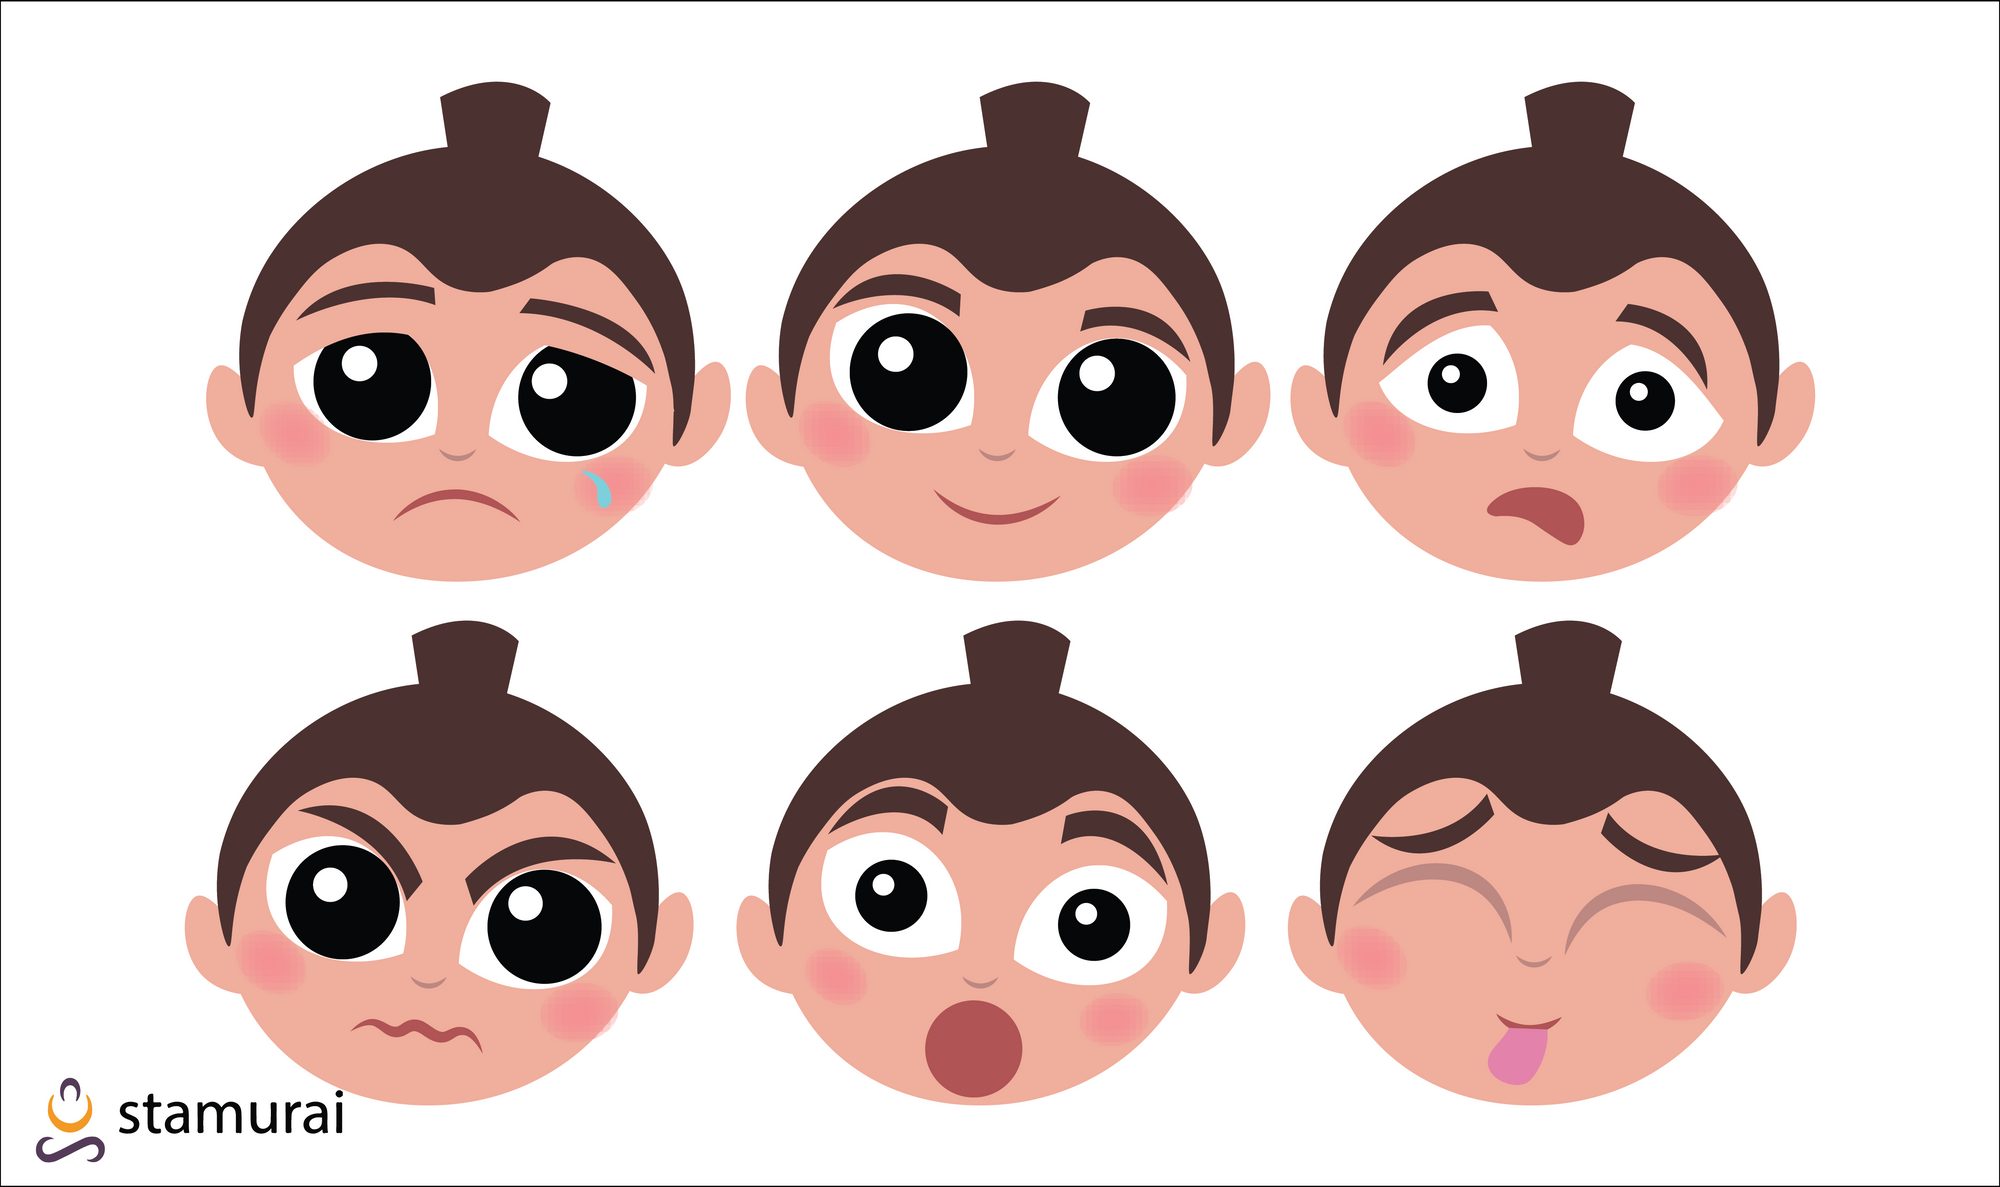 teaching children facial expressions - exercise for kids with autism